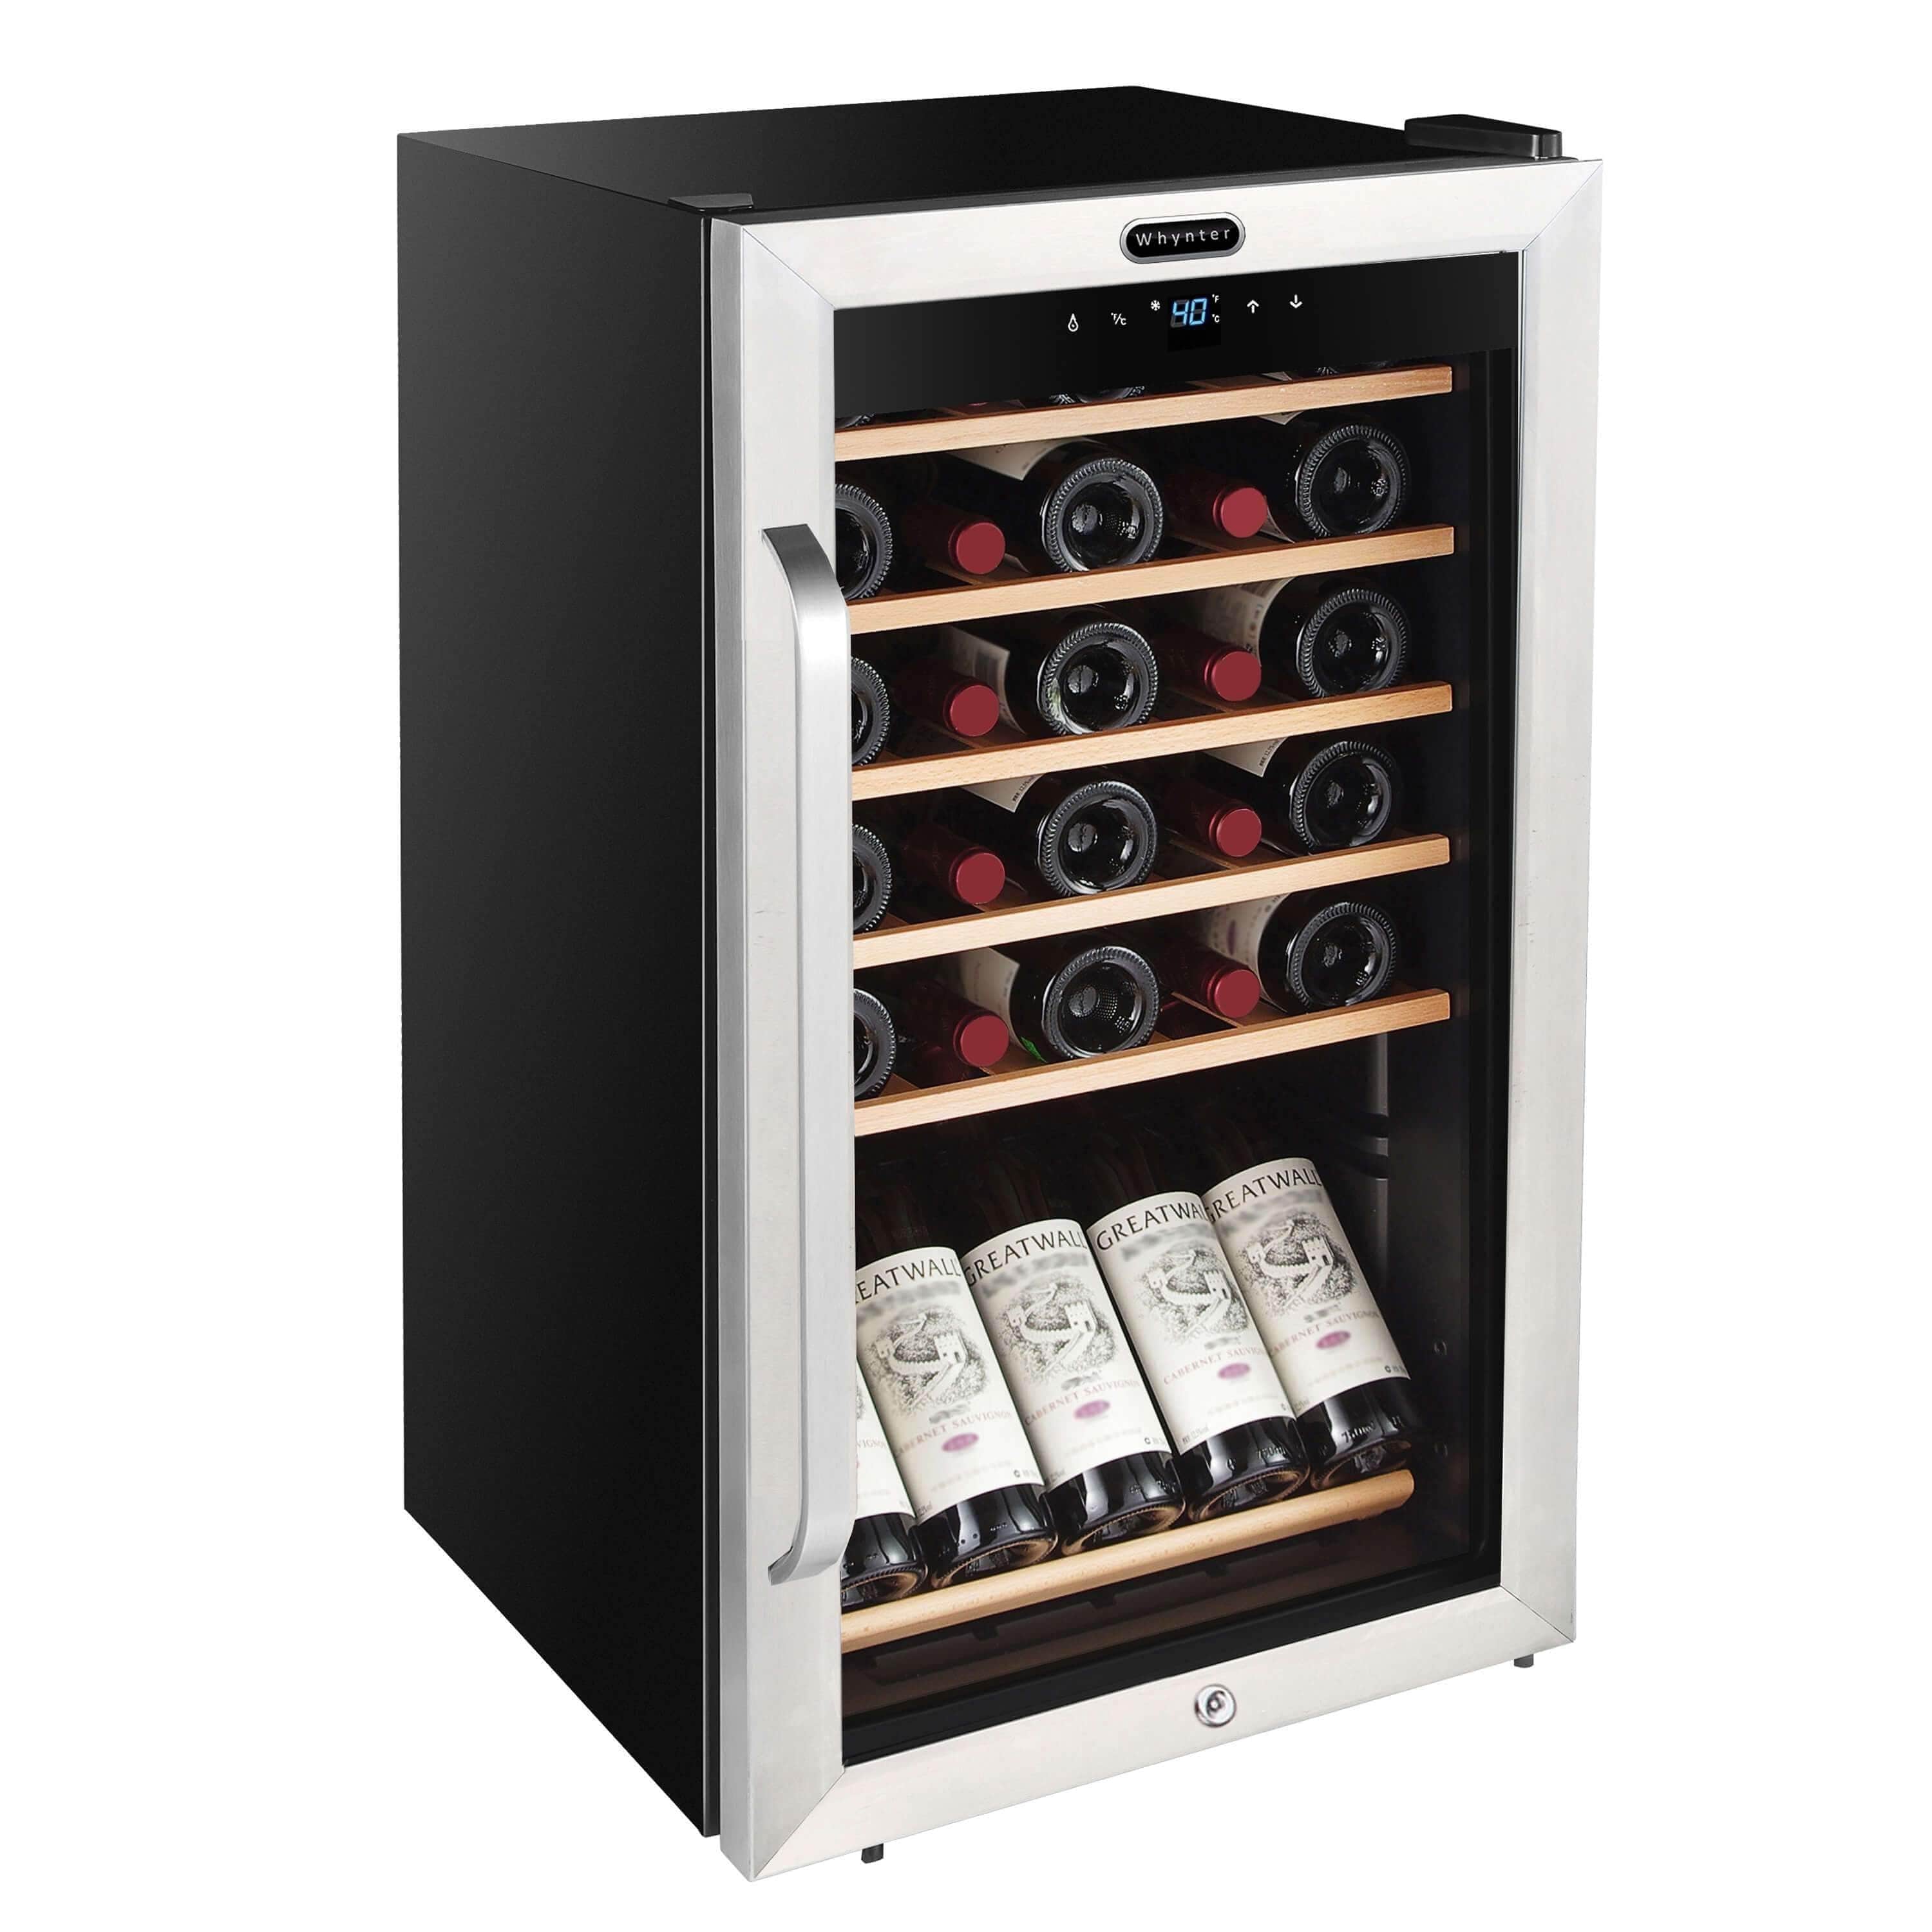 Whynter 34 Bottle Freestanding Stainless Steel Refrigerator with Display Shelf and Digital Control FWC-341TS Wine Coolers Empire